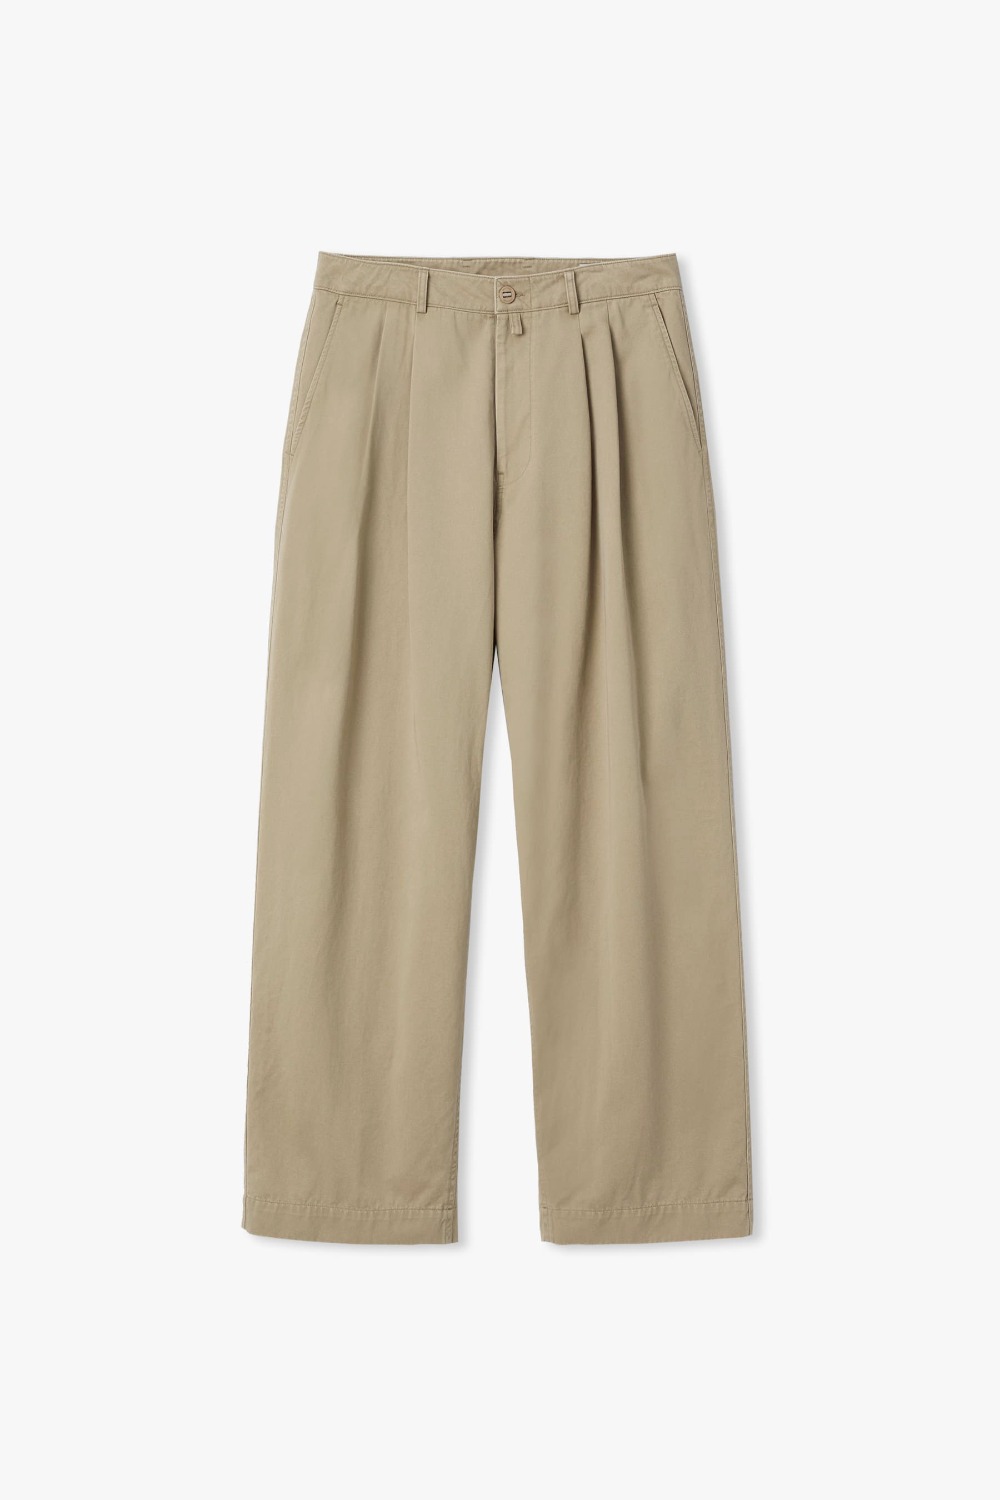 SAND BEIGE YRS Y-550 WIDE CHINO PANTS (ECP GARMENT DYED)